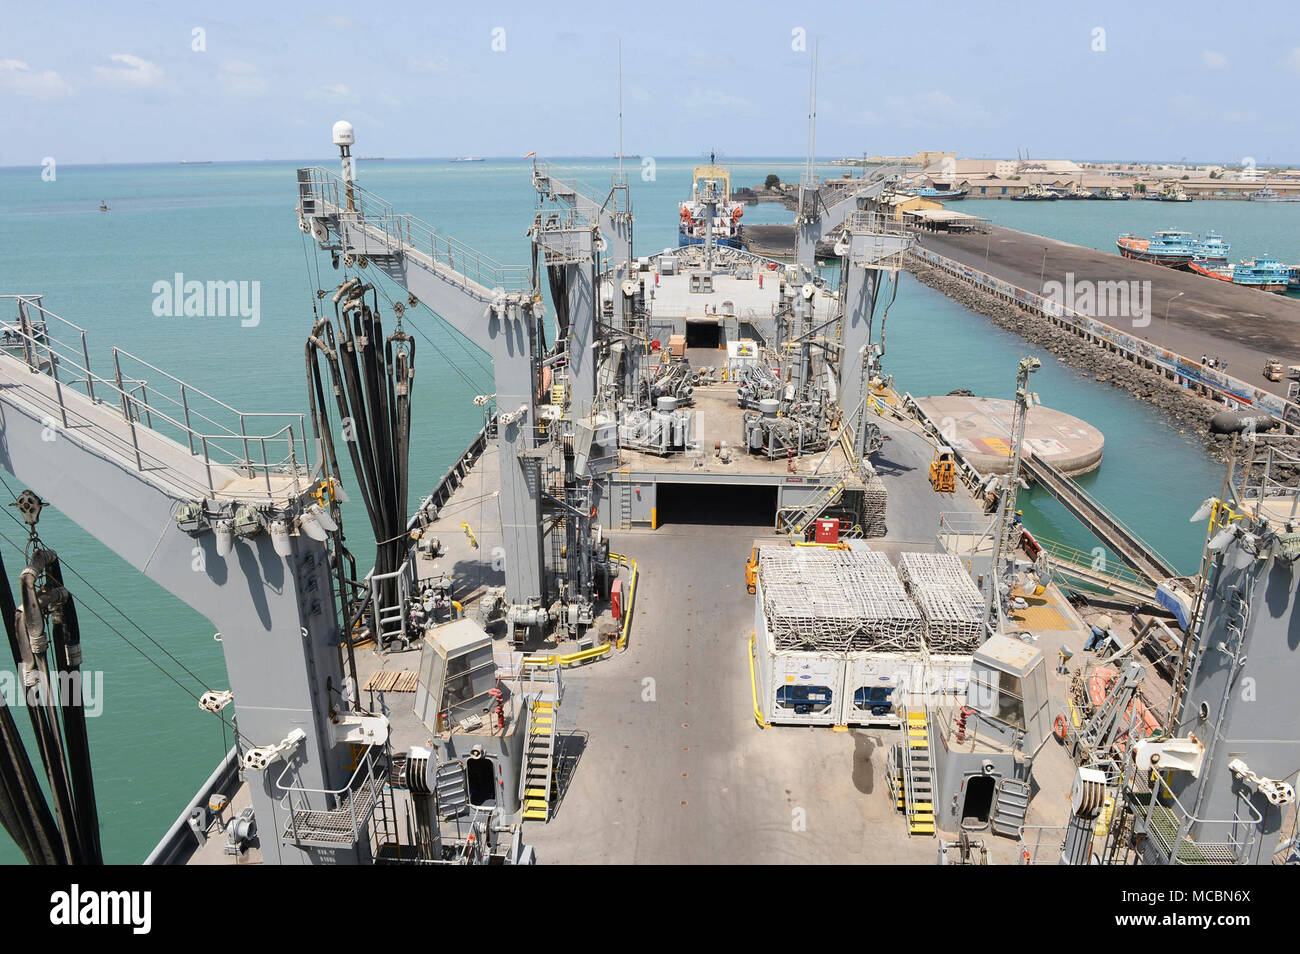 PORT OF DJIBOUTI, Djibouti –The USNS John Lenthall (T-AO-189) conducts cargo replenishment operations with the Camp Lemonnier Supply Department, Mar. 26, 2018. Lenthall is a Henry J. Kaiser-class fleet replenishment oiler of the United States Navy. Her motto is 'Shaft of the Spear.' NAVSUP FLC Sigonella stands ready to fulfill logistic responsibilities and serves as a vital link to enable mission success across Europe and Africa. NAVSUP FLC Sigonella is one of eight fleet logistics centers under NAVSUP, which provides global logistics, business and support services to fleet, shore and industri Stock Photo